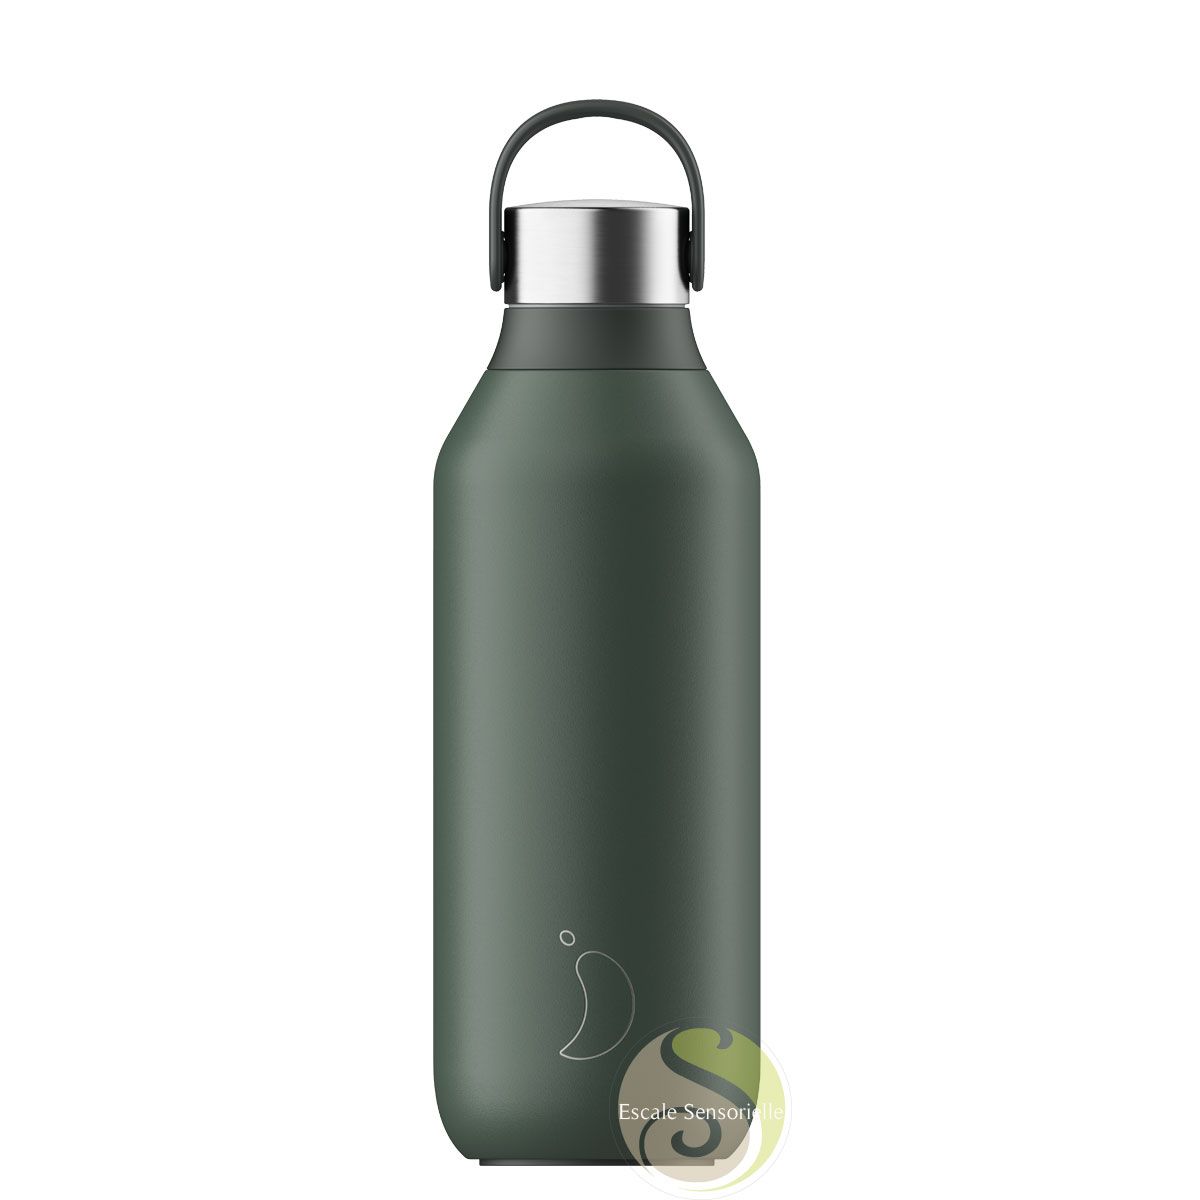 Serie 2 Chilly's bottle bouteille isotherme mine green 500ml